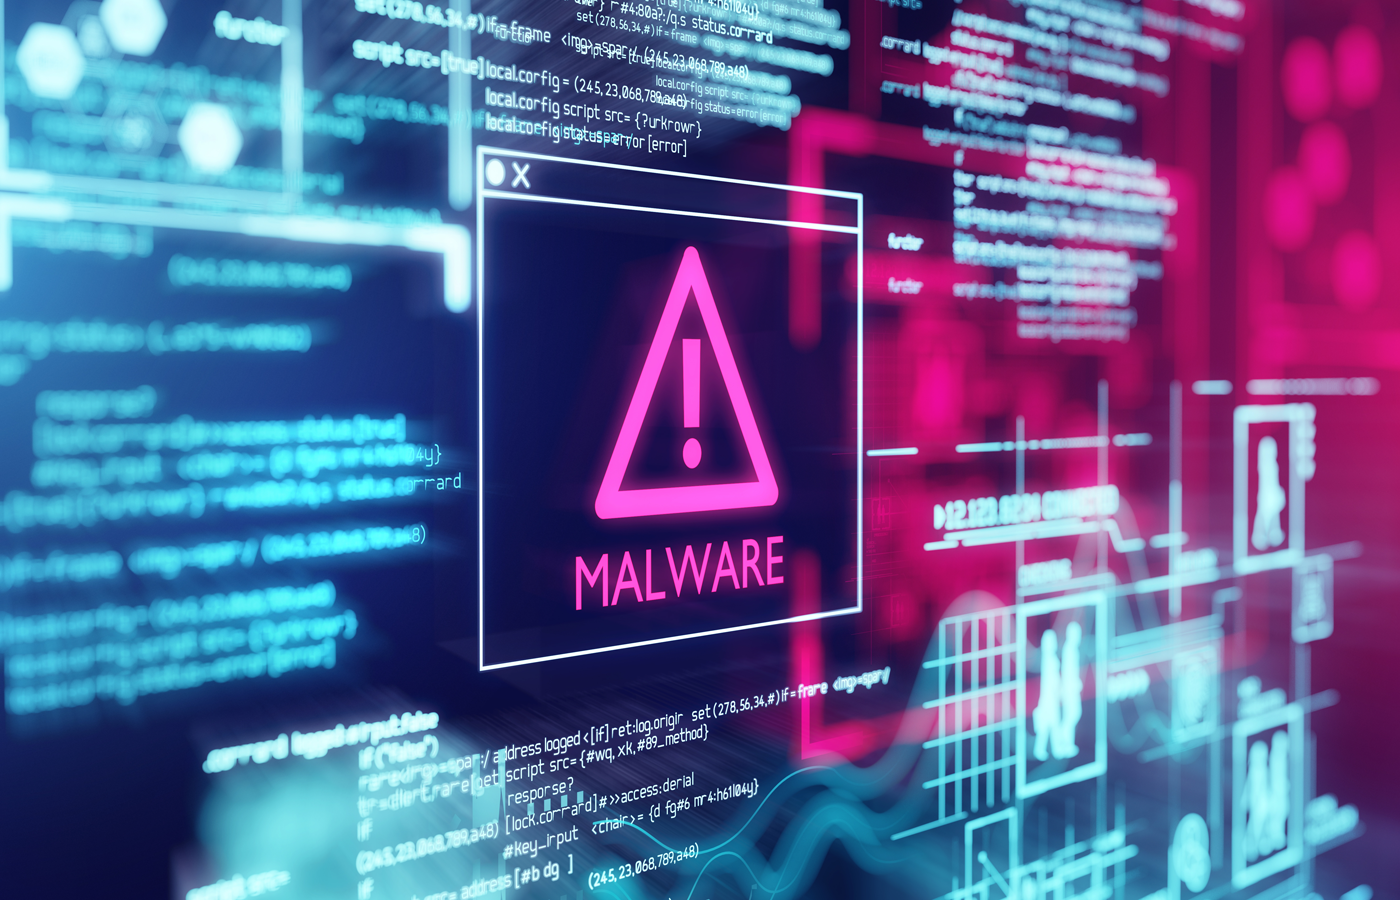 A computer screen with program code warning of a detected malware script program.